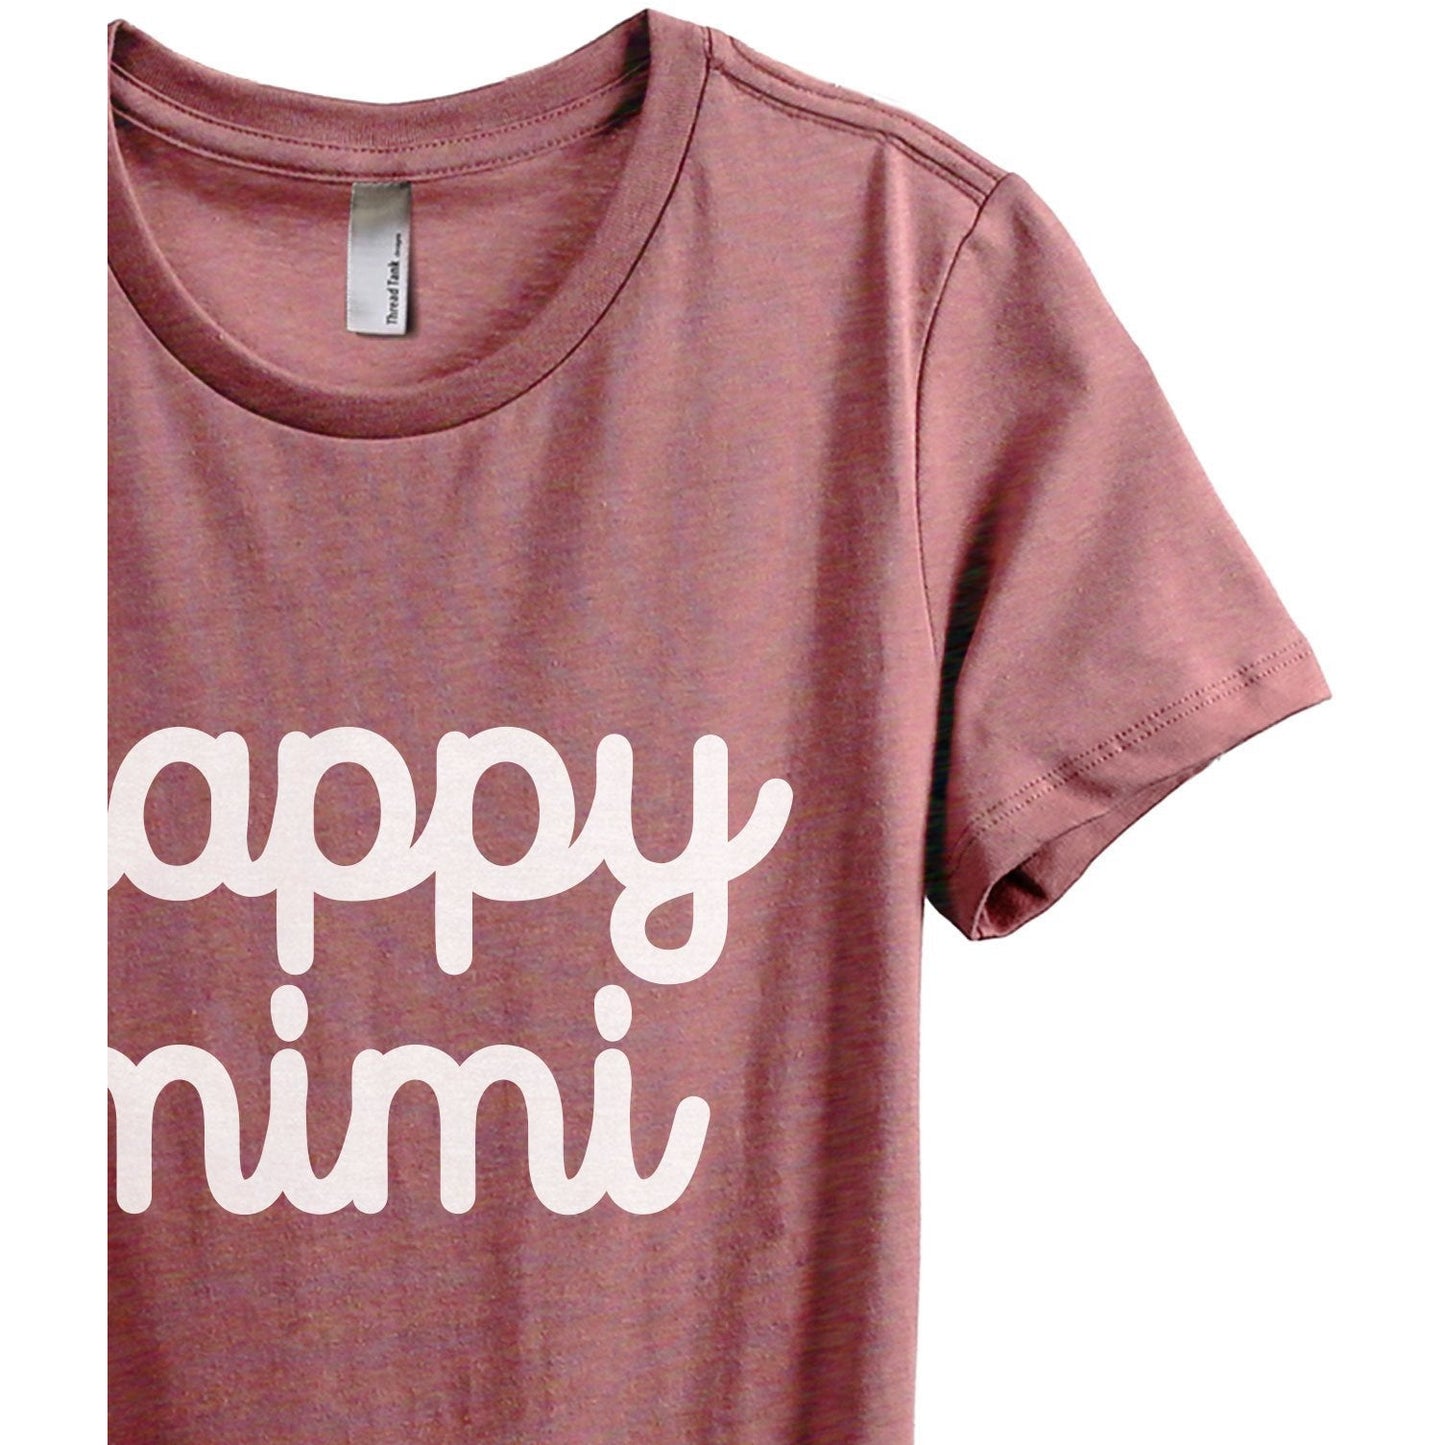 Happy Mimi Women's Relaxed Crewneck T-Shirt Top Tee Heather Rouge Zoom Details
